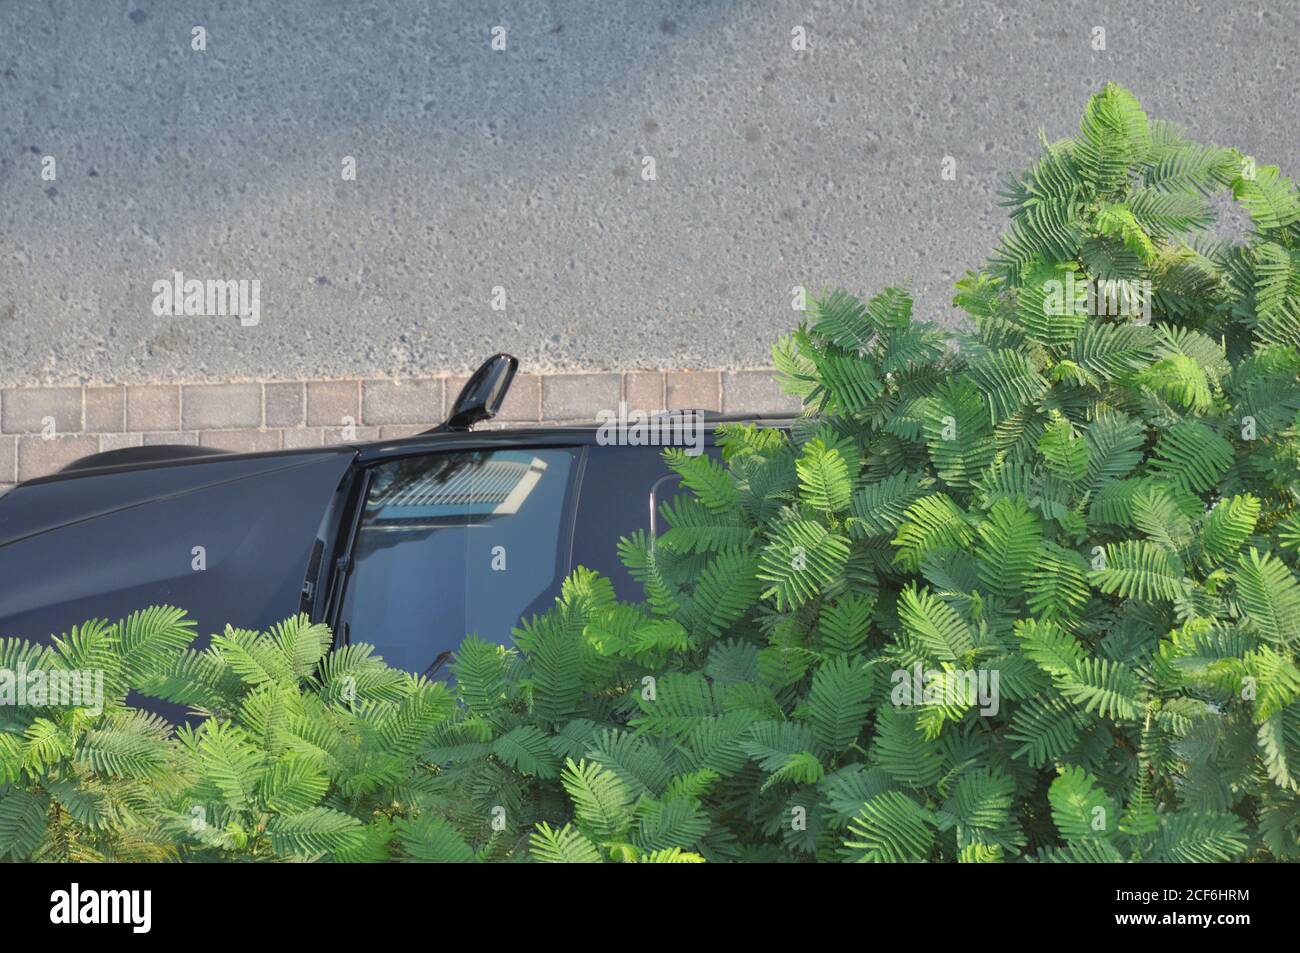 Urban concrete jungle tree. Car parked under emerald and olive green tree, showing reflection of building in window. Stock Photo